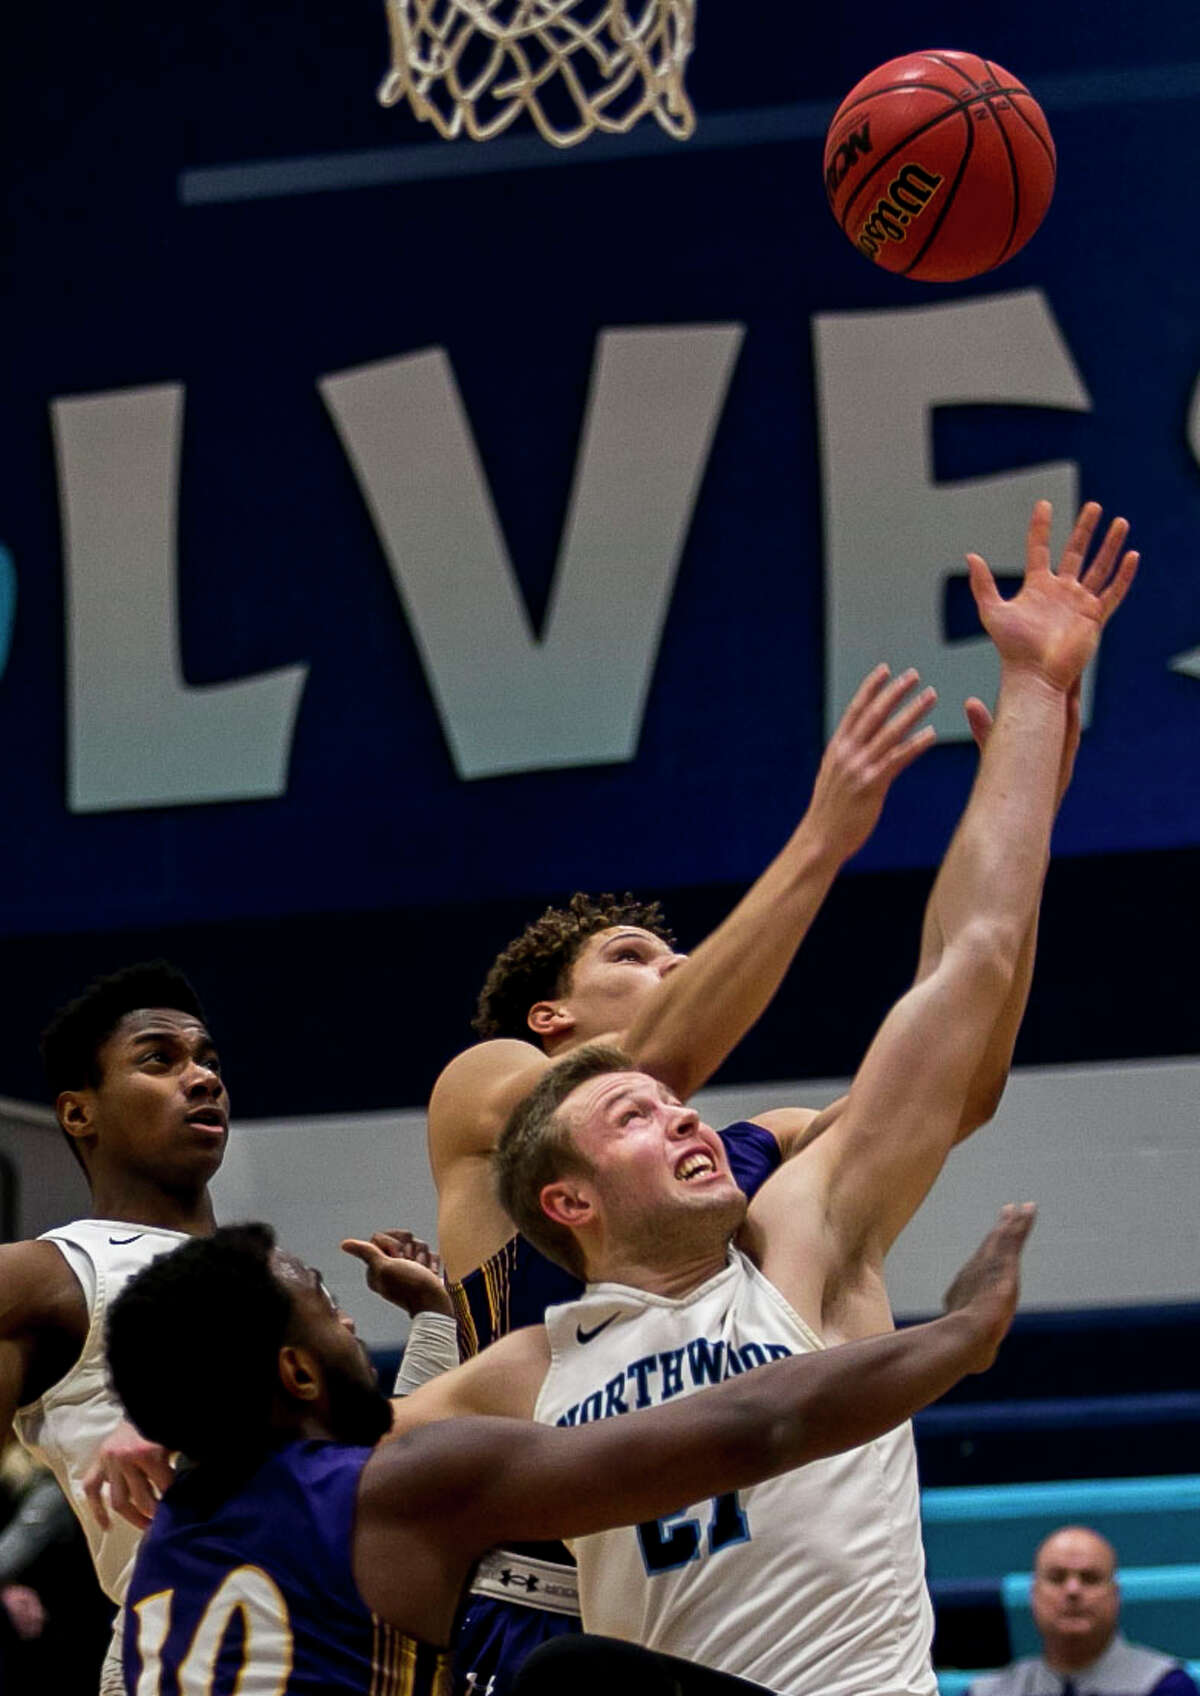 Northwood's Zach Allred reaches for the rebound with Ashland's defense during a game against Ashland on Saturday, Jan. 20, 2018 at Northwood University. (Josie Norris/for the Daily News)